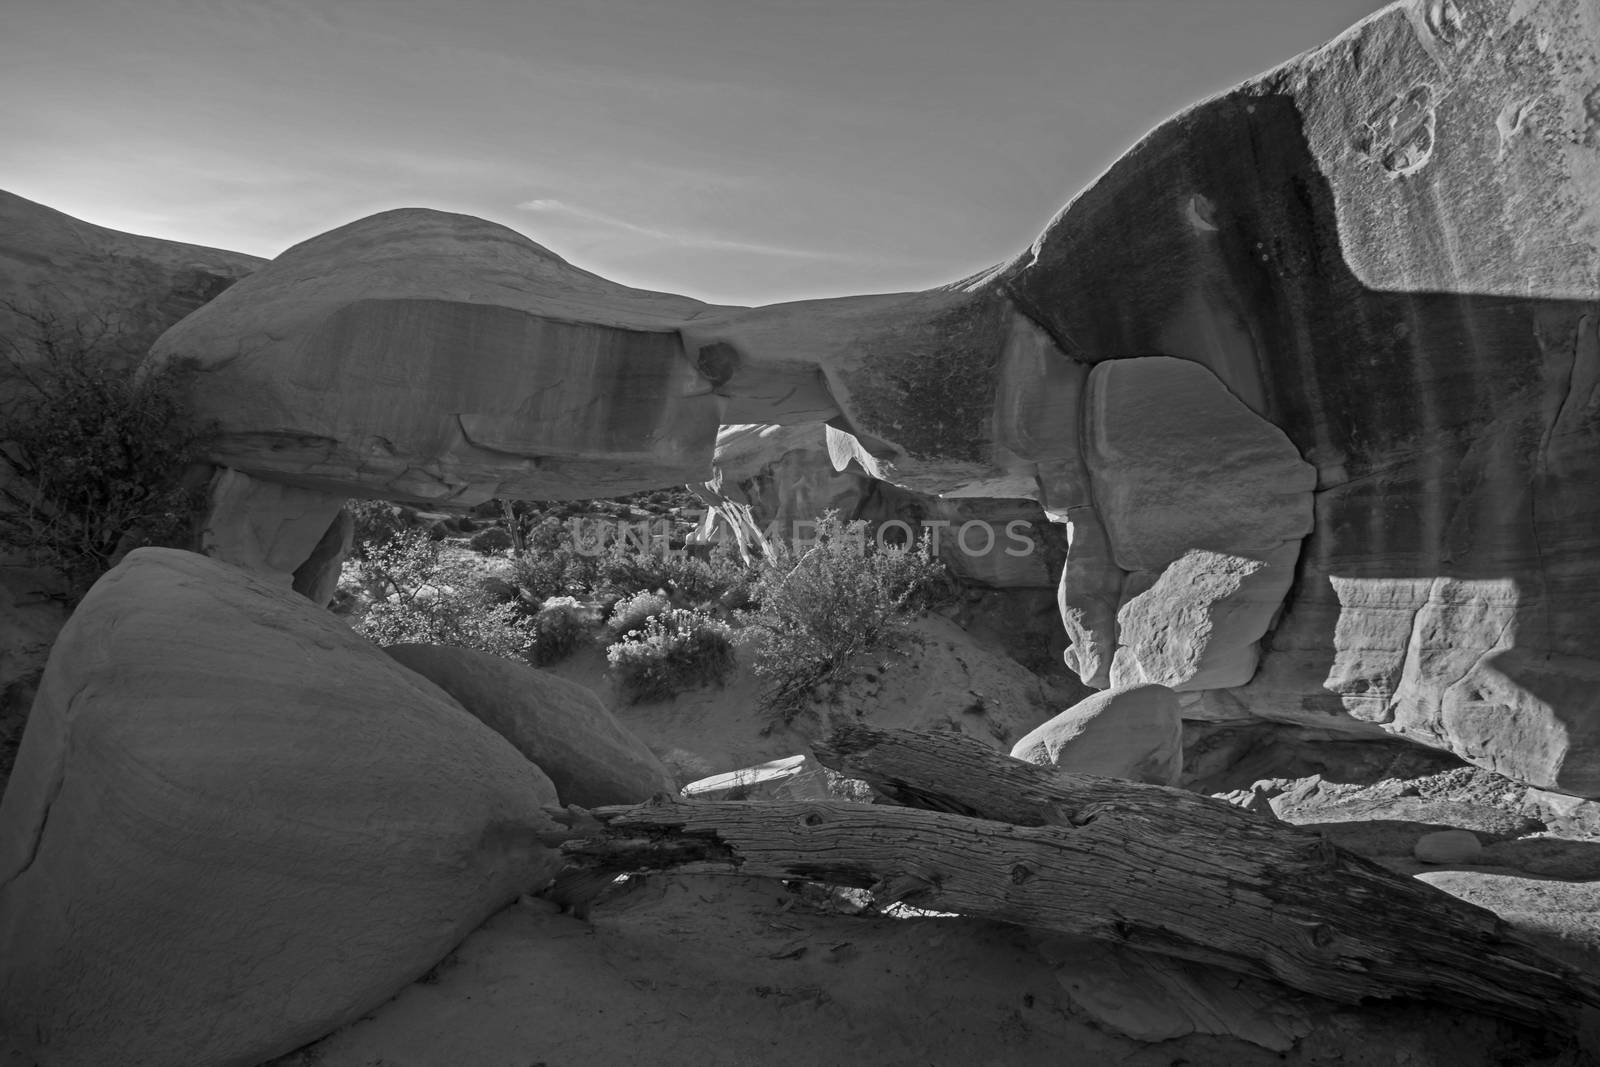 Monochrome image of strange Rock Formations in The Devil's Garden near the town of Escalante in the Staircase Escalante National Monument in Utah. USA